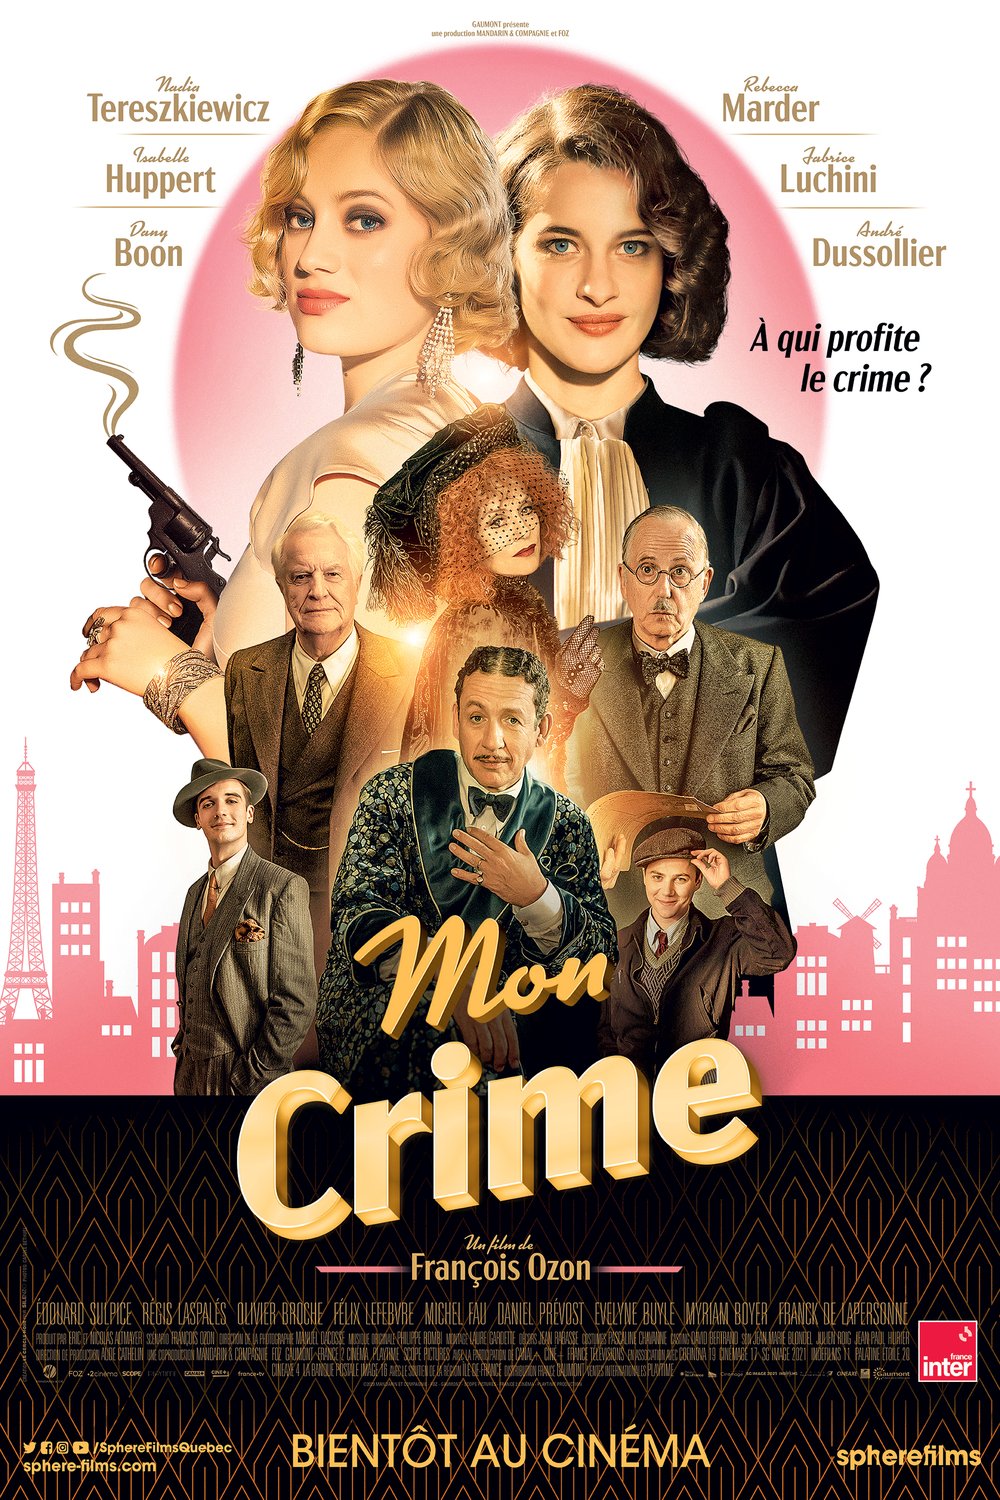 Poster of the movie Mon crime